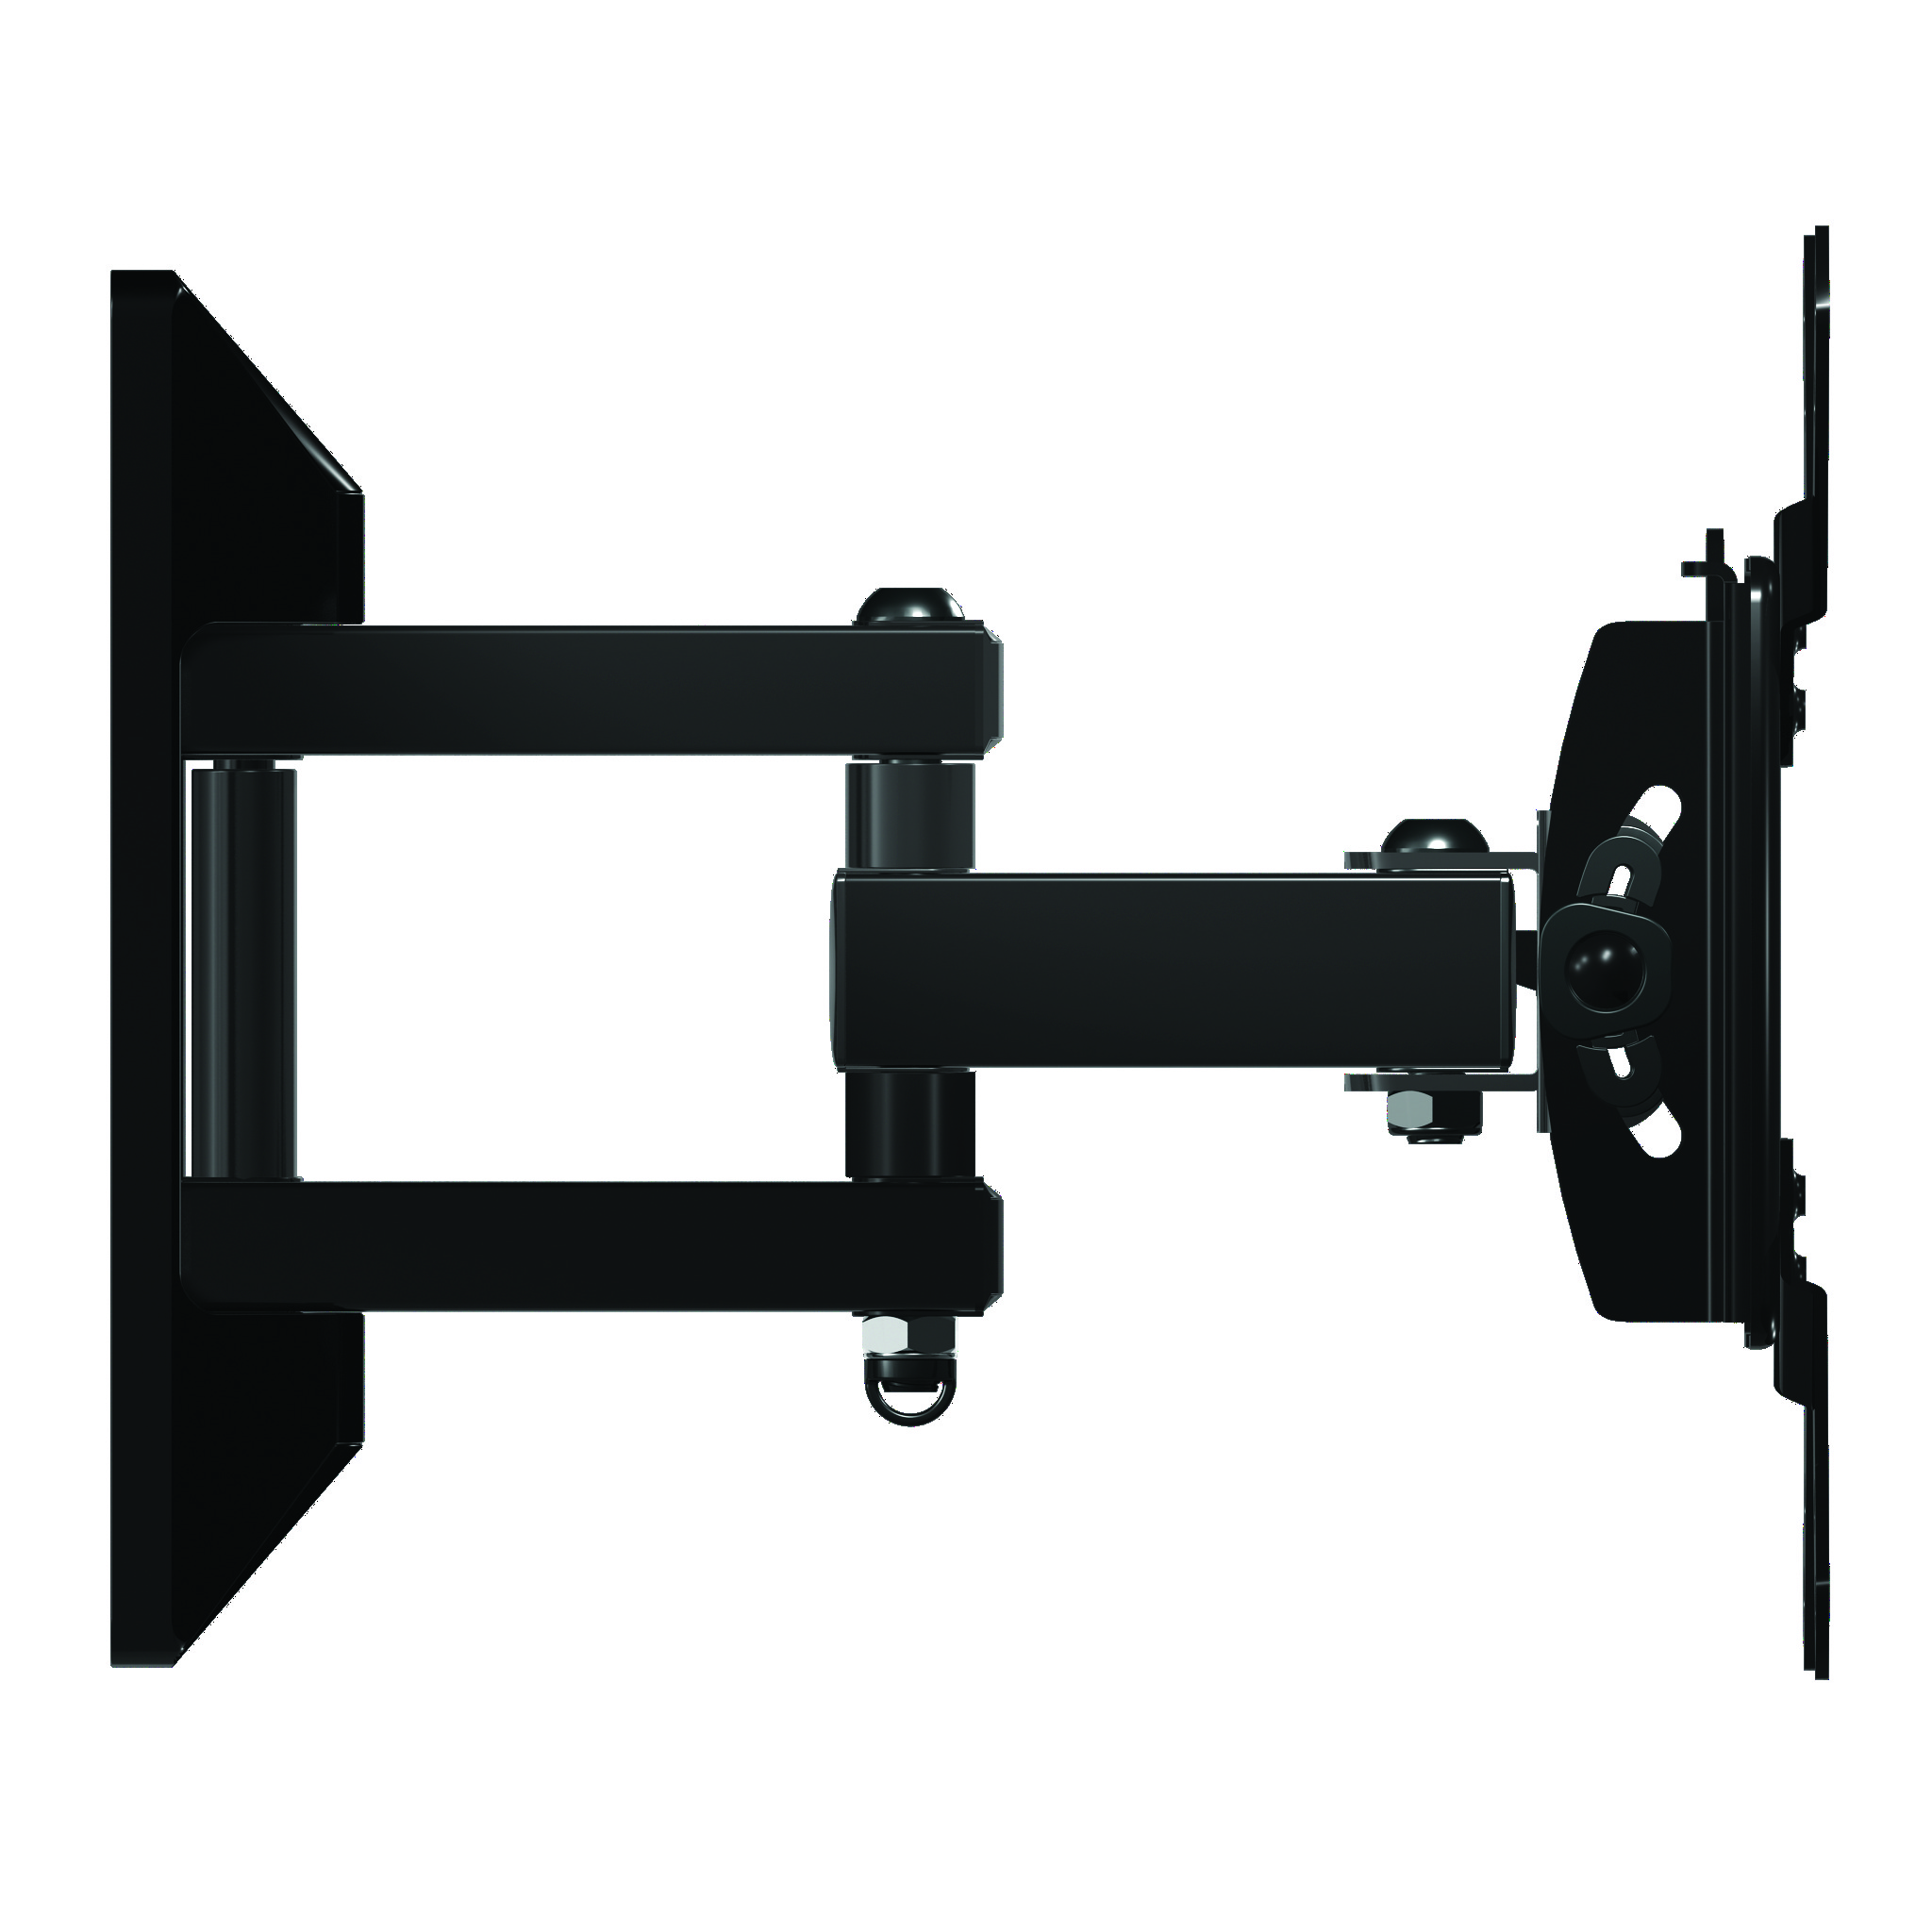 SANUS Vuepoint Full-Motion TV Mount for TVs 13"-40" up to 50lbs Comes with 6' 4K HDMI cable Tilts, Swivels and Extends 10" from the Wall - FSF110KIT - image 2 of 6